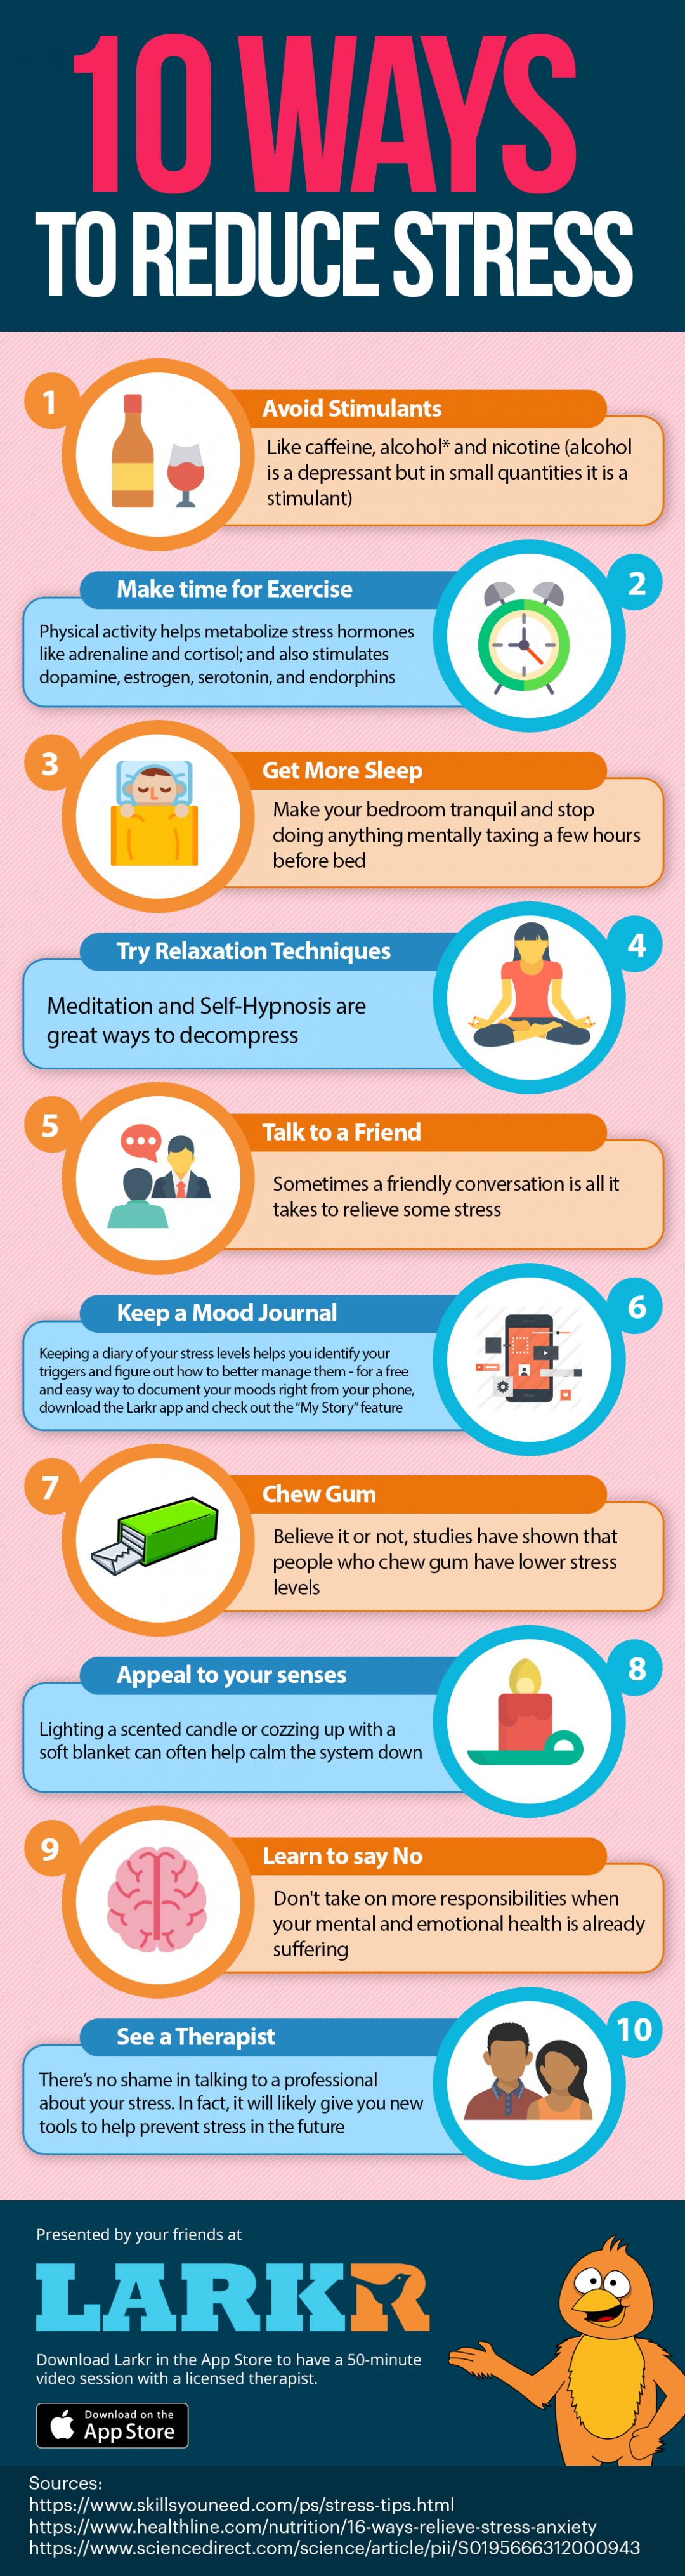 Tips on Stress Management